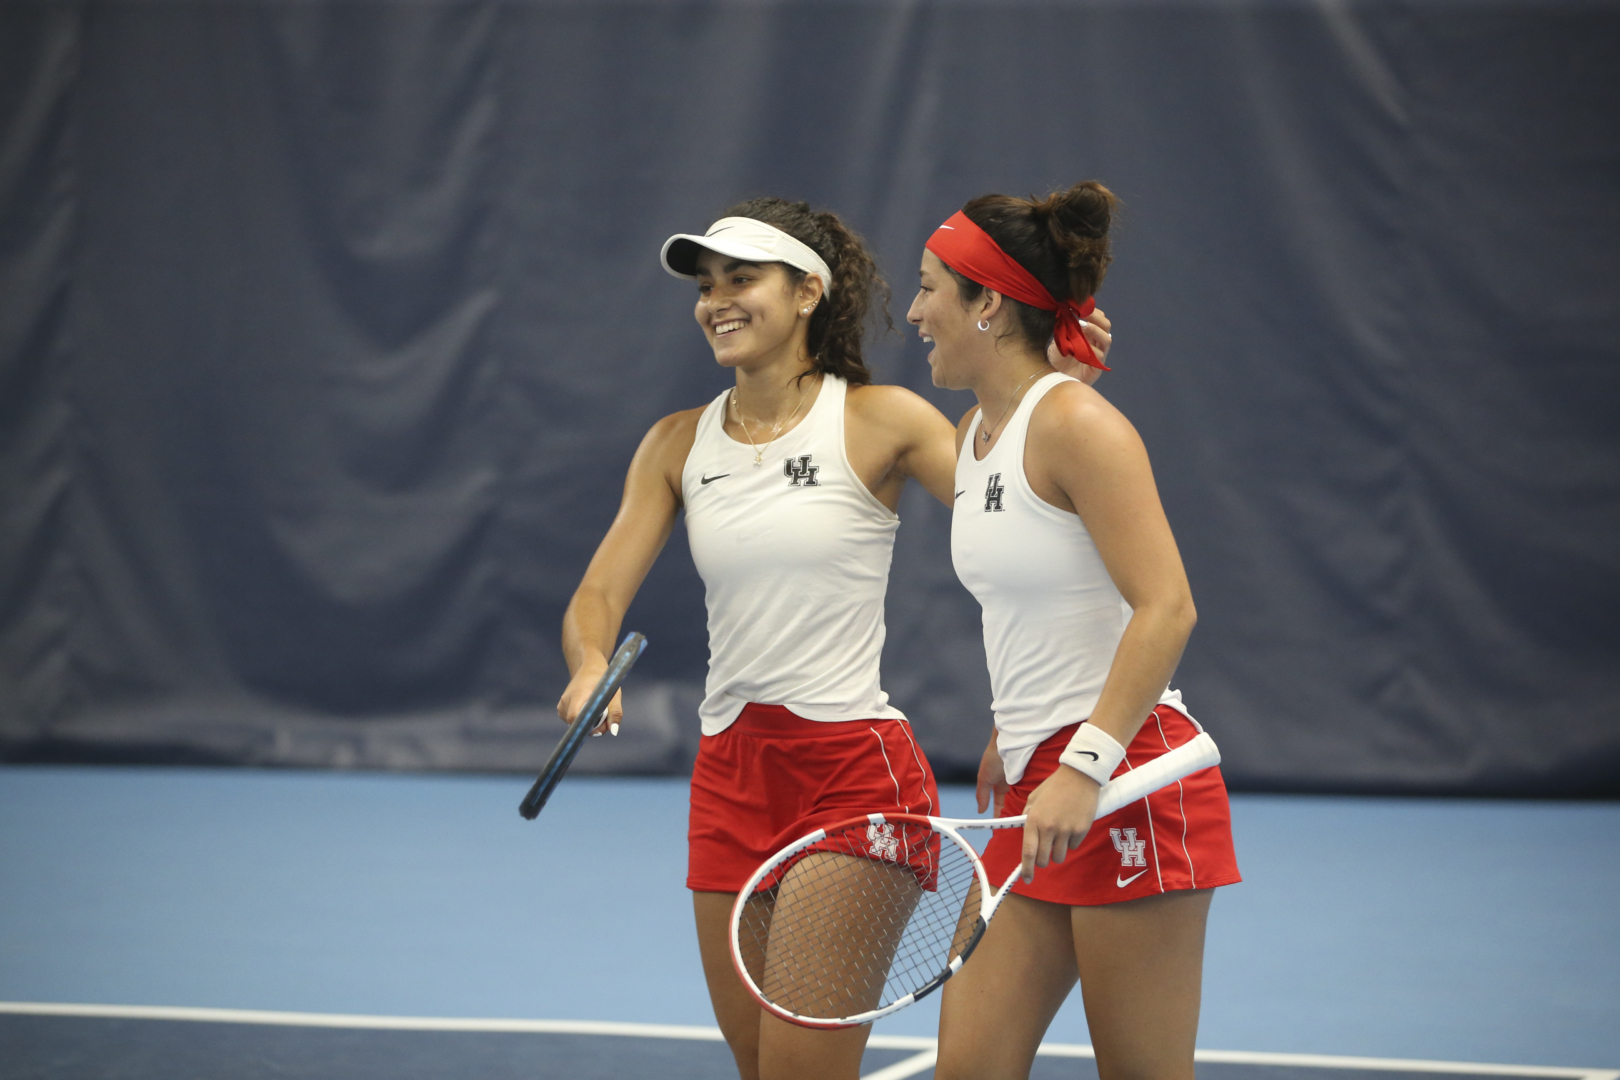 Senior Azul Pedemonti and junior Blanca Cortijo Parreno are two of the longest tenured Cougars on the UH tennis roster, and have fully embraced the diverse environment brought upon them by the makeup of the team. | Courtesy of UH Athletics.